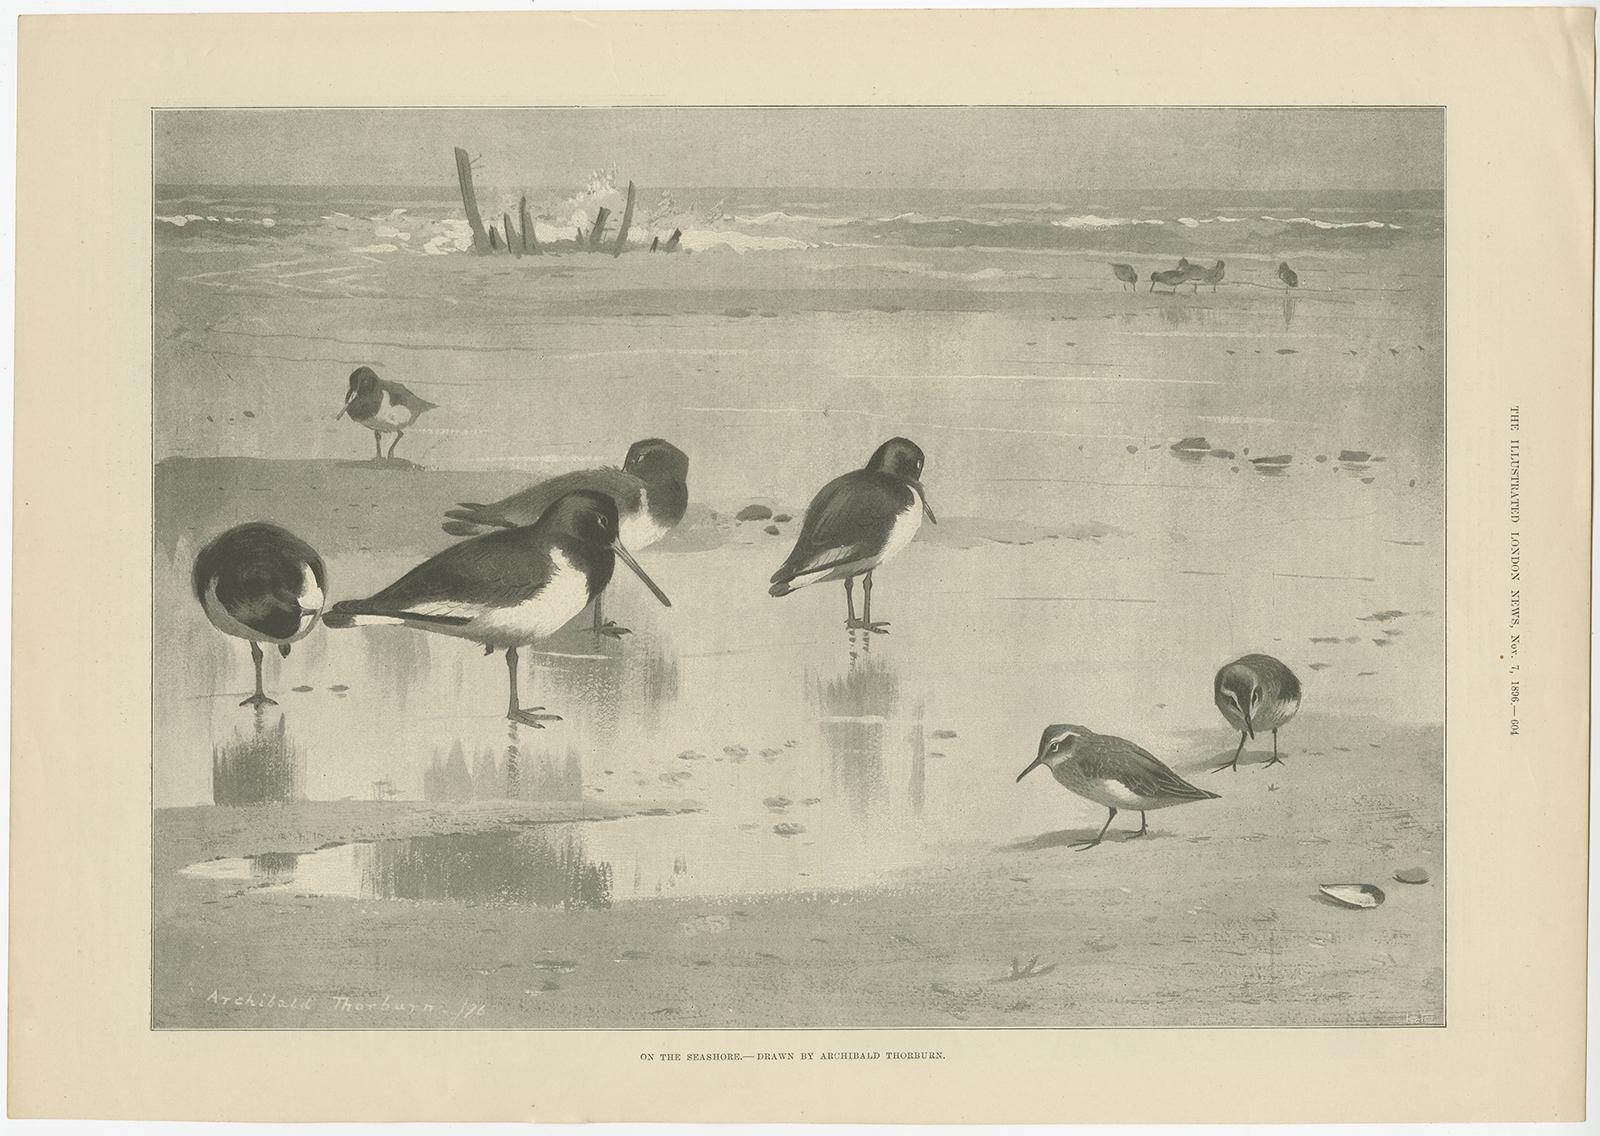 Antique print titled 'On the Seashore'. 

Old print showing birds on the seashore. Made after Archibald Thorburn.

Artists and Engravers: Published in The Illustrated London News.

Condition: Good, general age-related toning. English text on